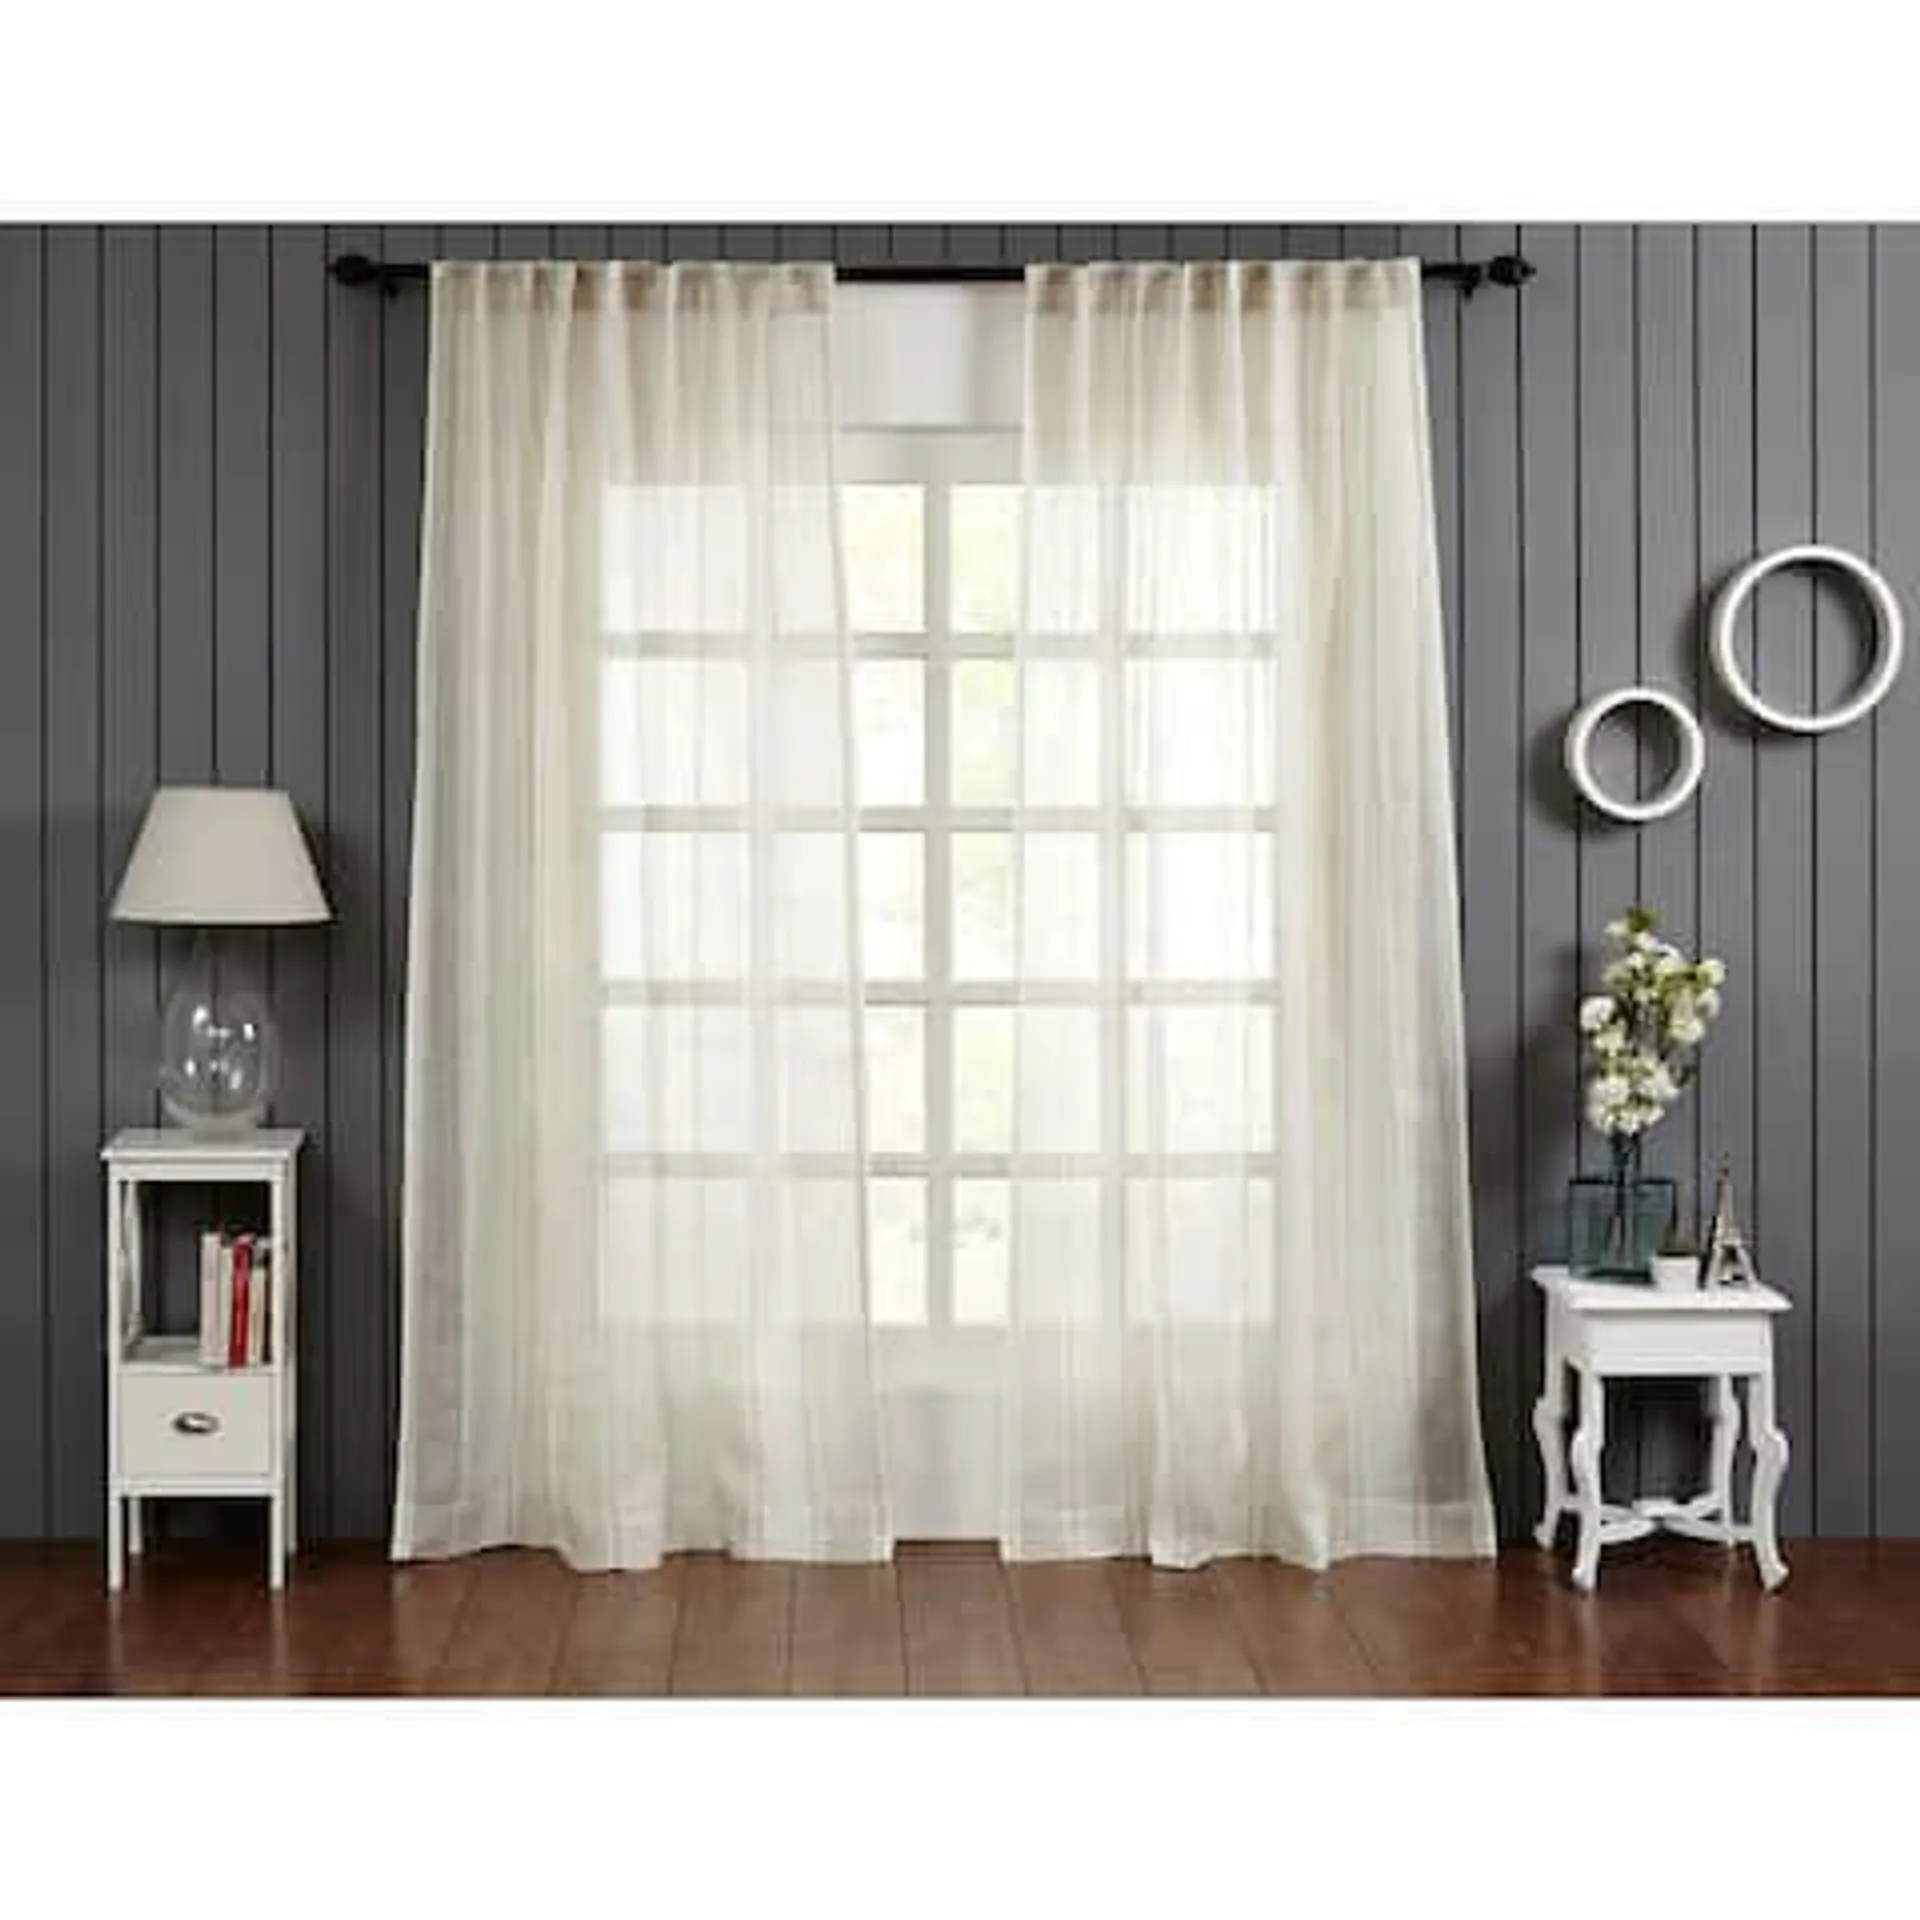 India's Heritage Shimmer Linen Sheer Curtain - Single Curtain Panel